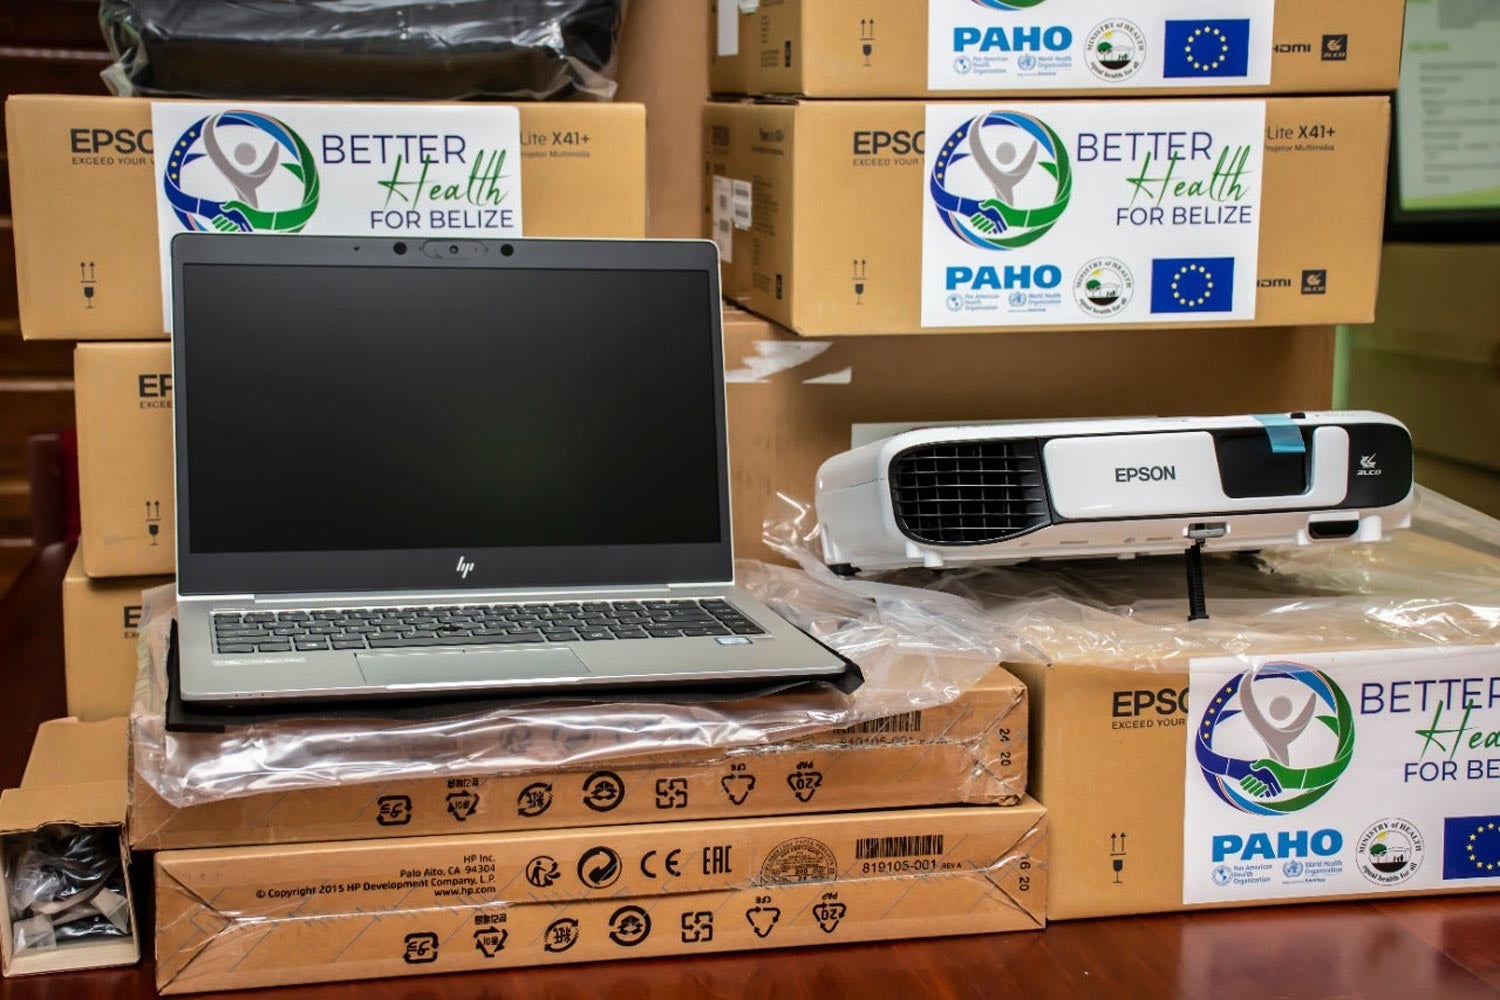 Laptops and projectors donated to the Ministry of Health and Wellness for training